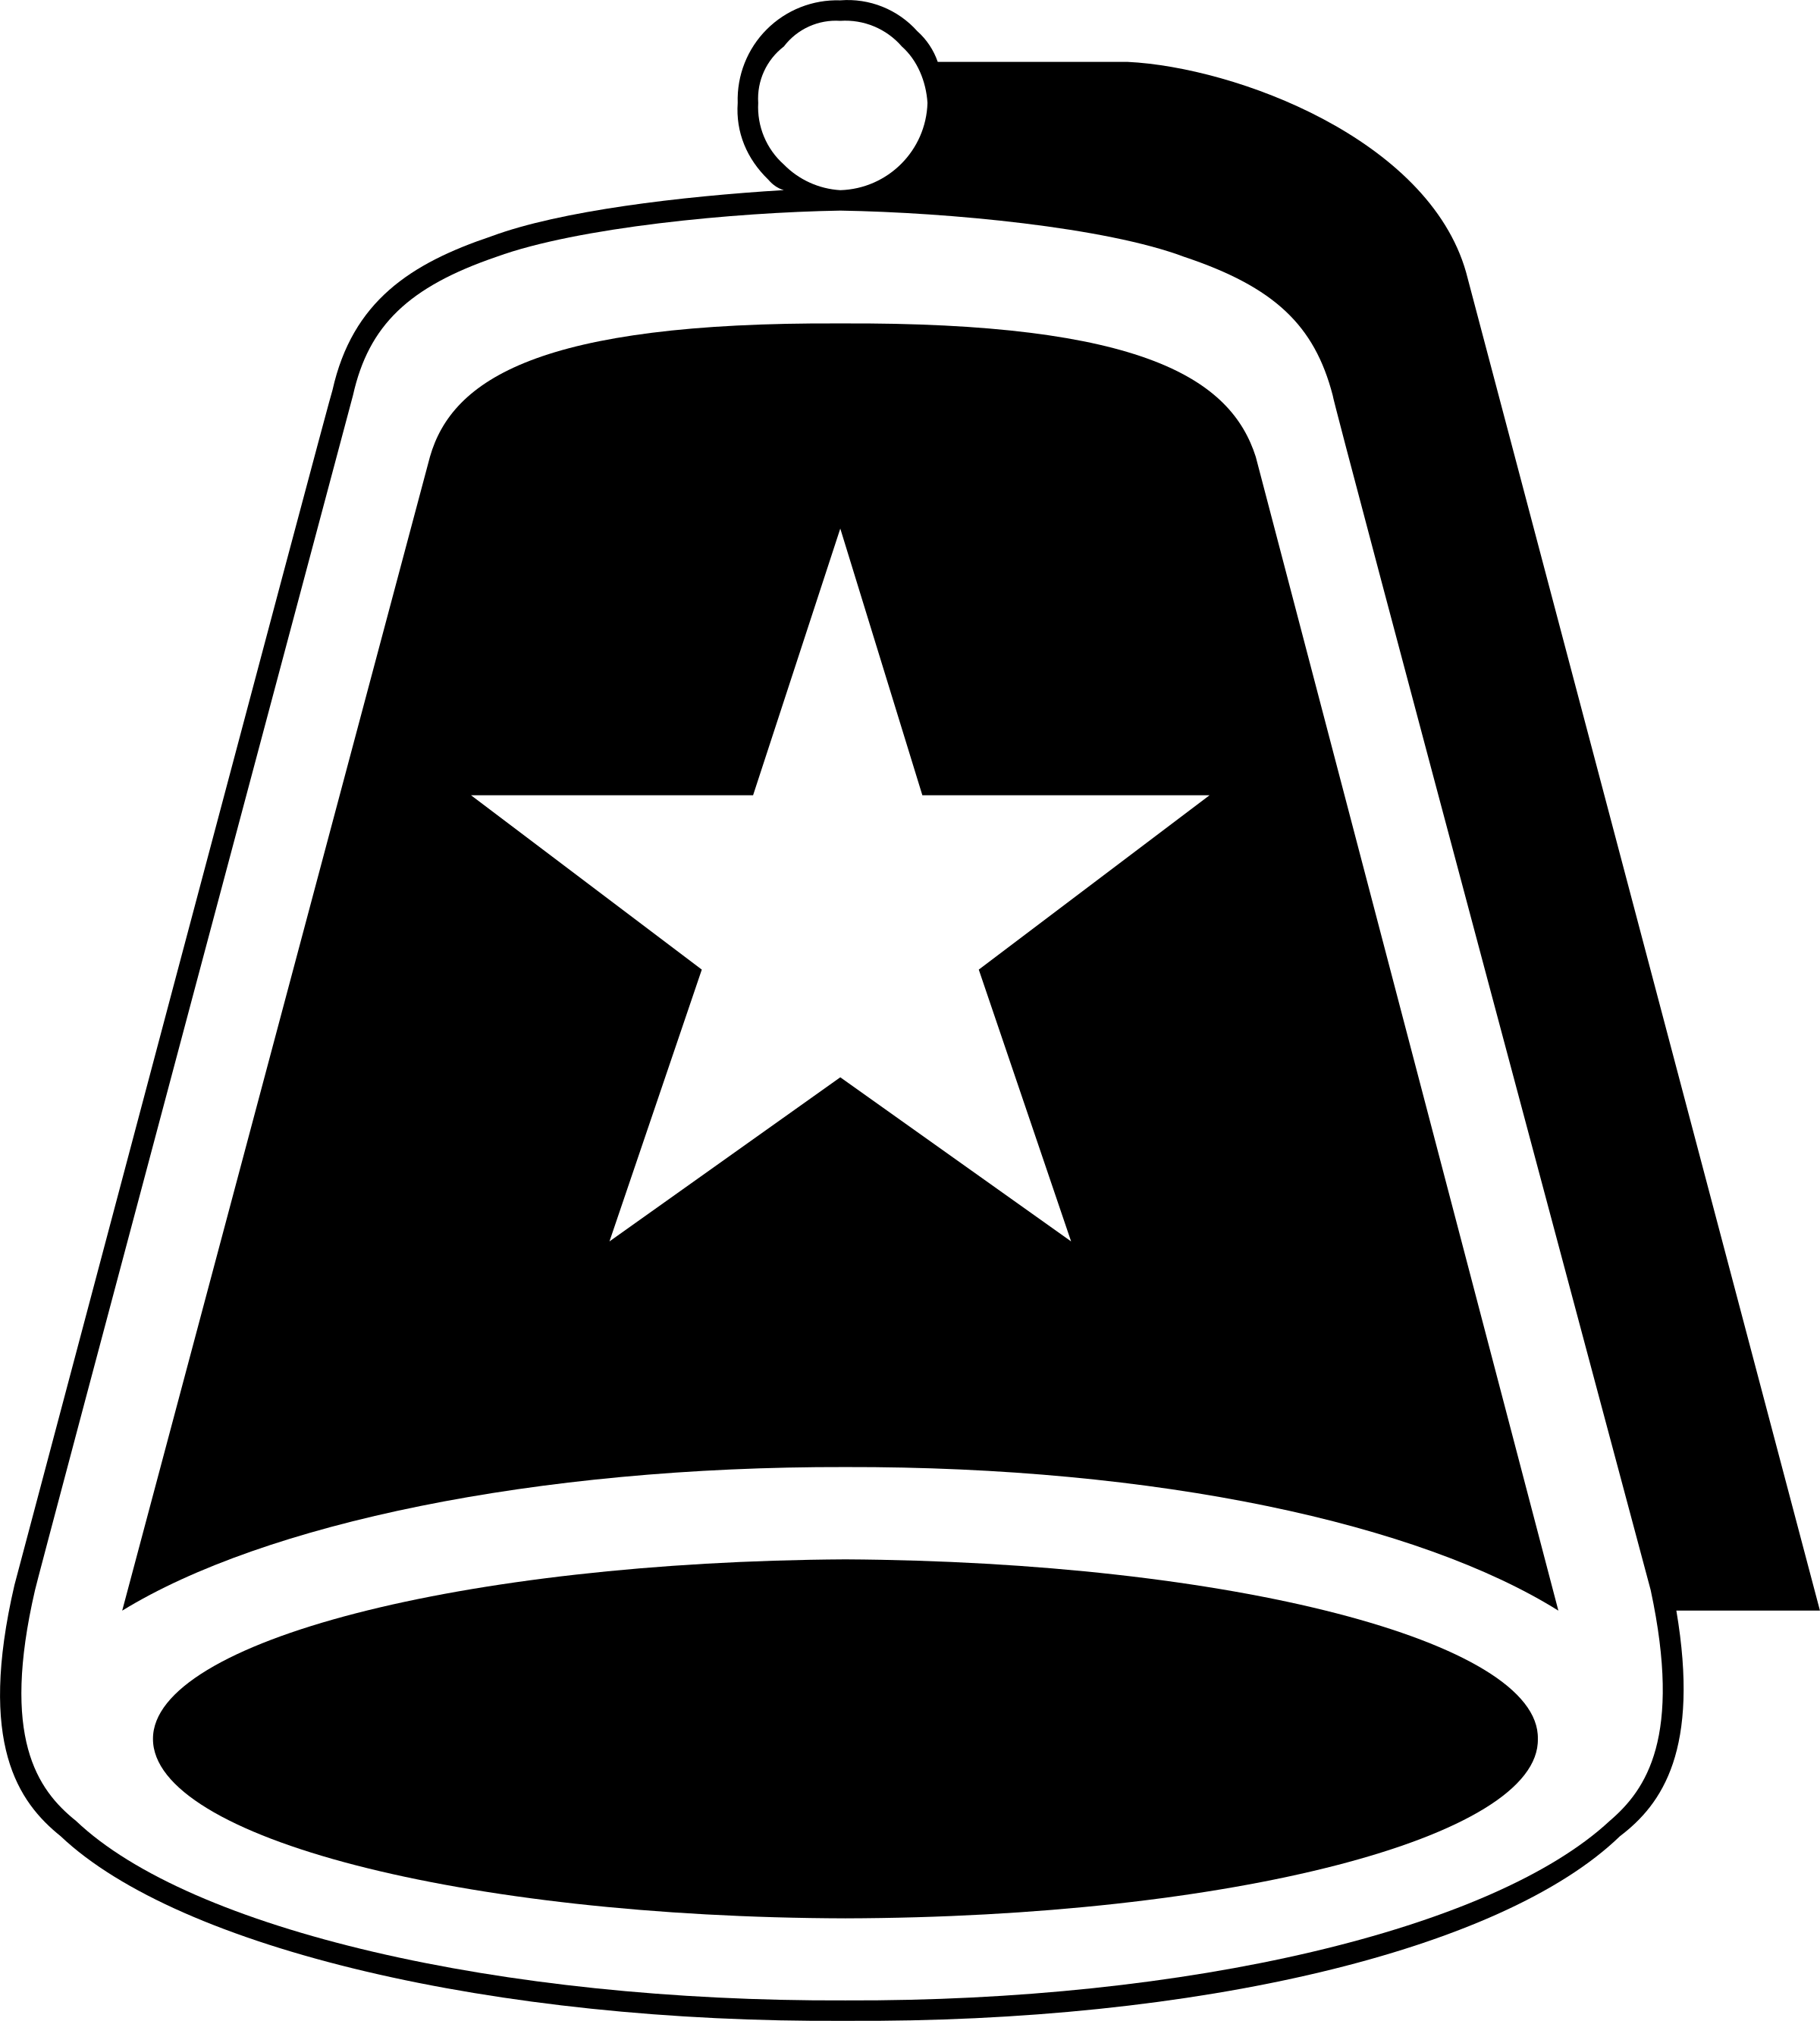 Fez Hat Icon Blackand White PNG image